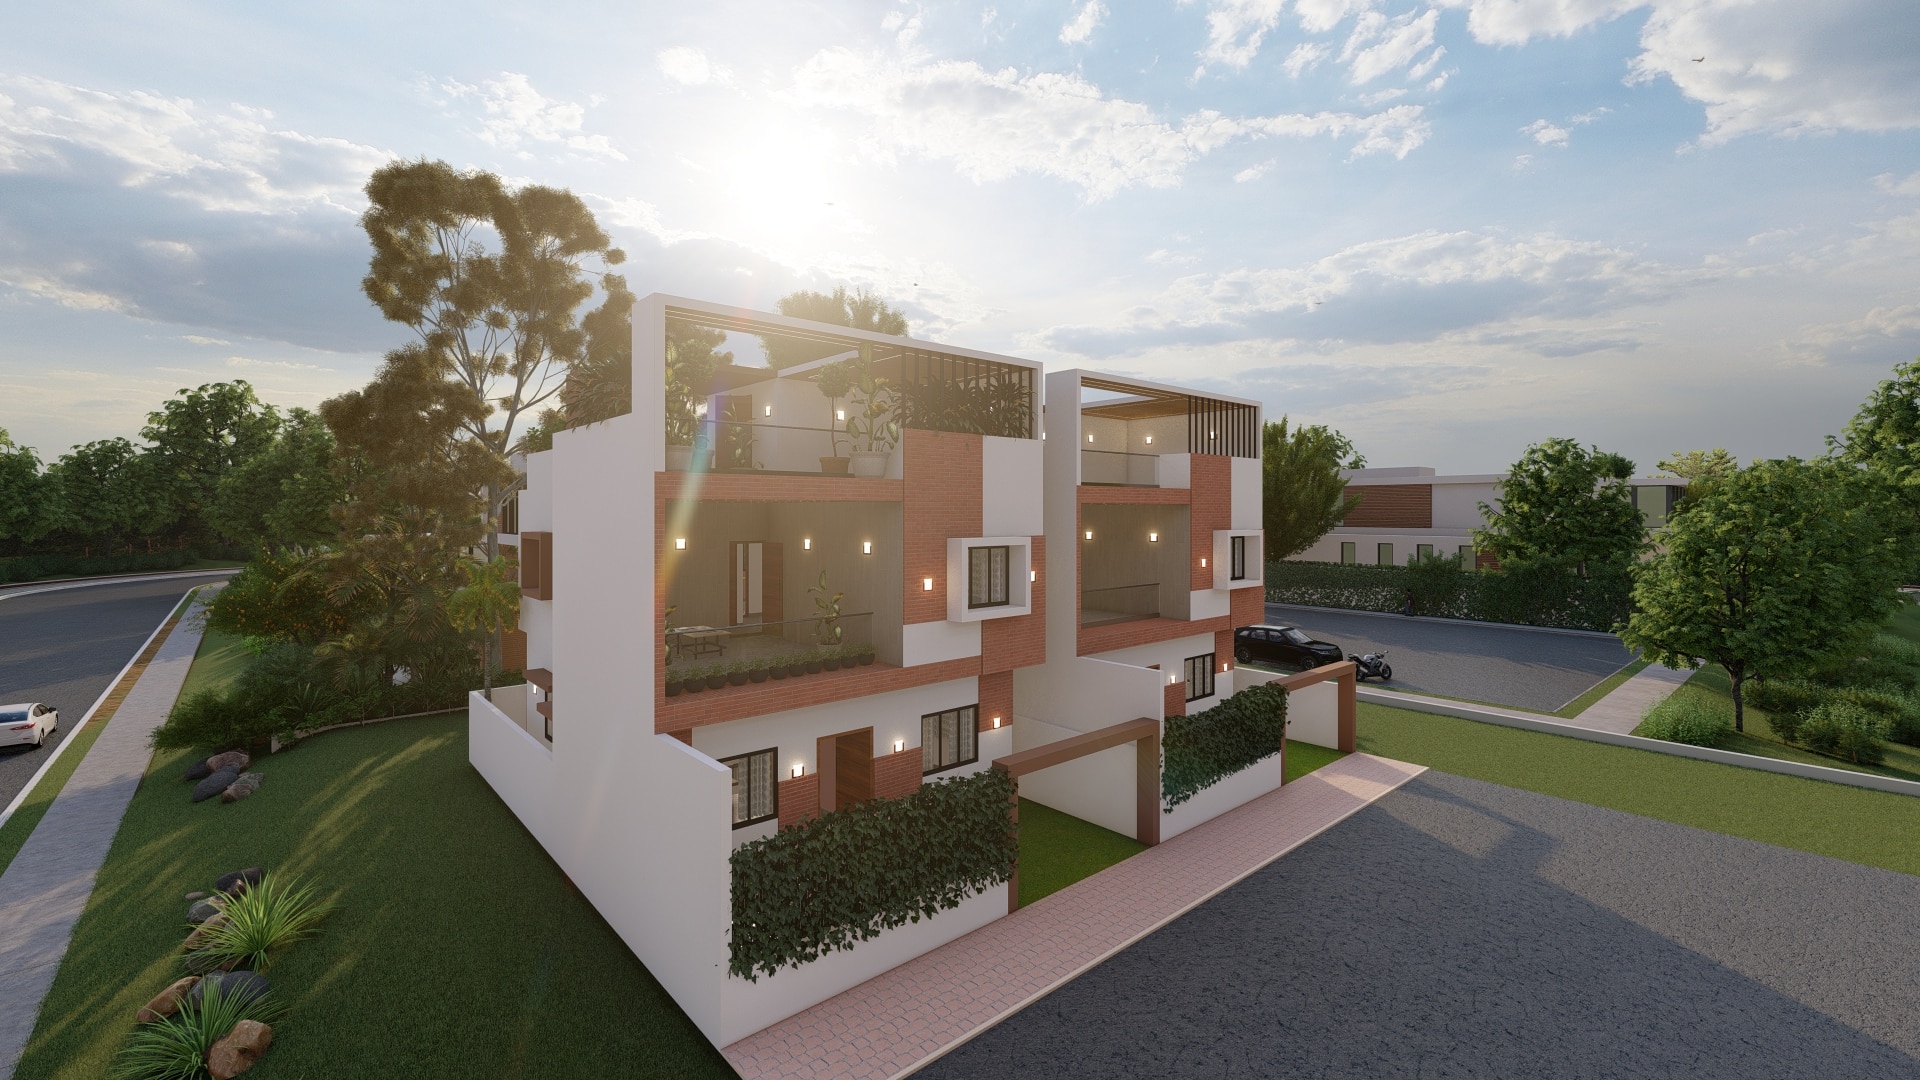 new bungalow home design front elevation of by urban terrace west facing 1500 ft